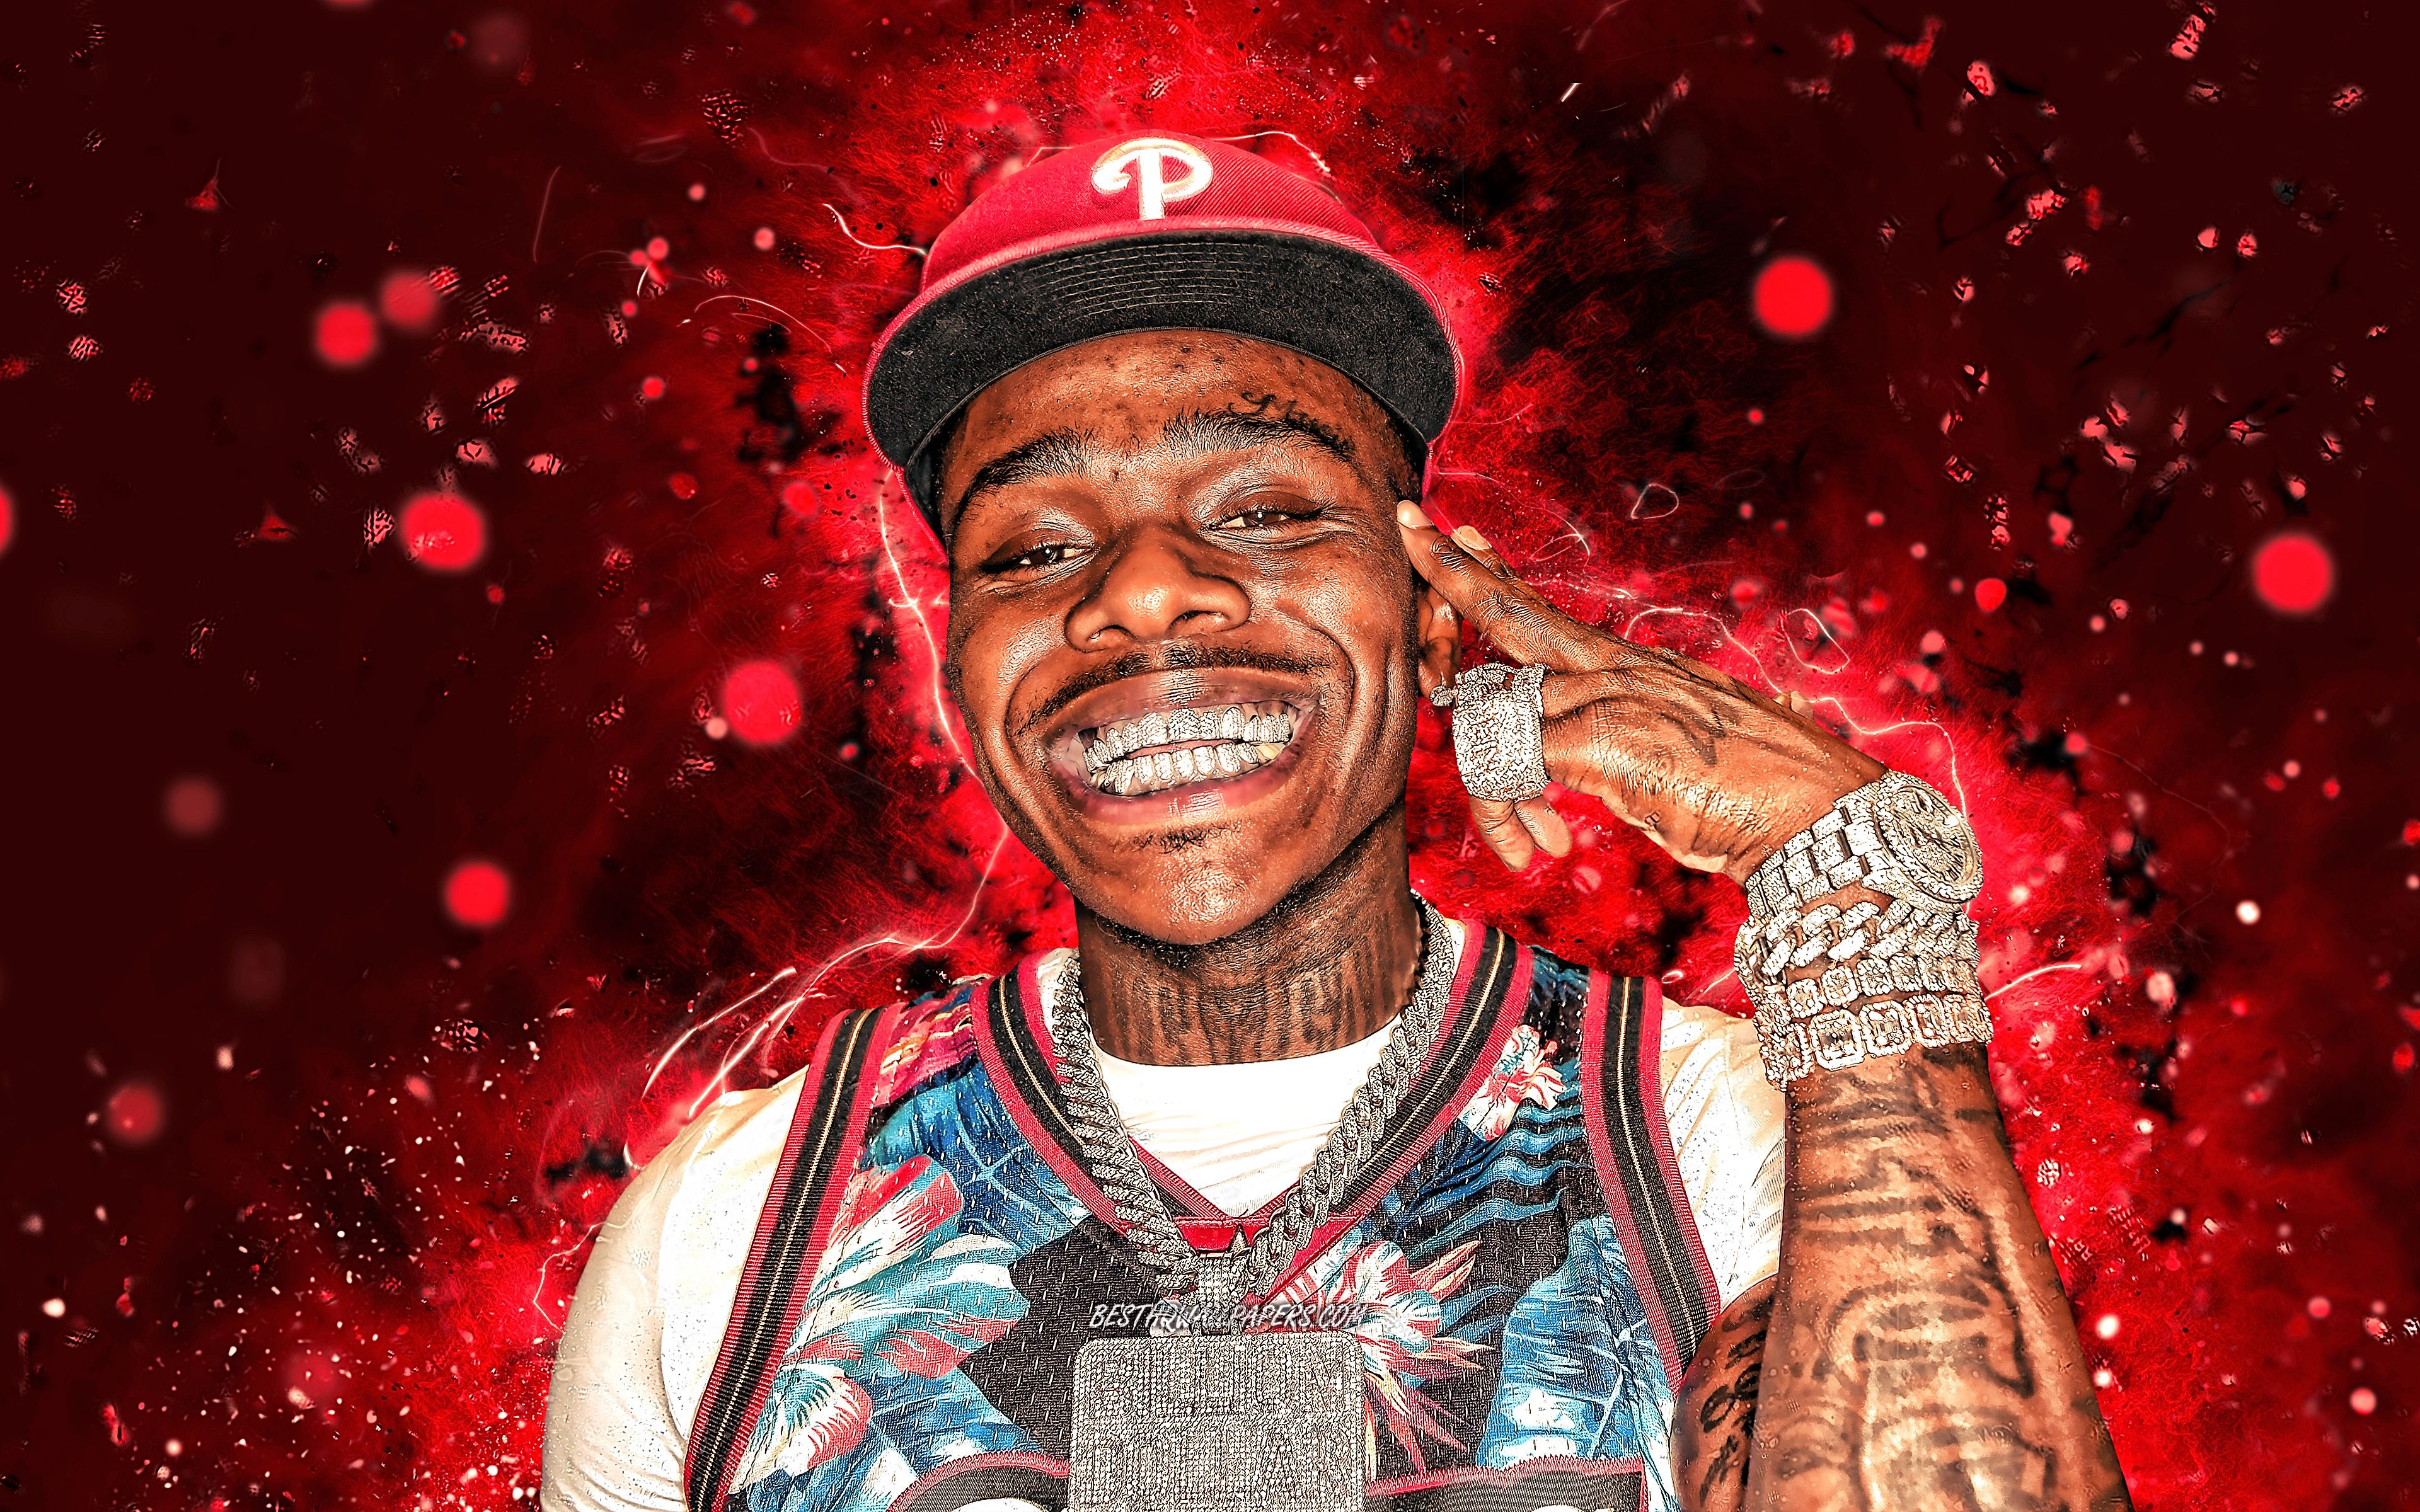 Download wallpaper DaBaby, 4k, american rapper, red neon lights, music stars, creative, Jonathan Lyndale Kirk, american celebrity, DaBaby 4K for desktop with resolution 3840x2400. High Quality HD picture wallpaper